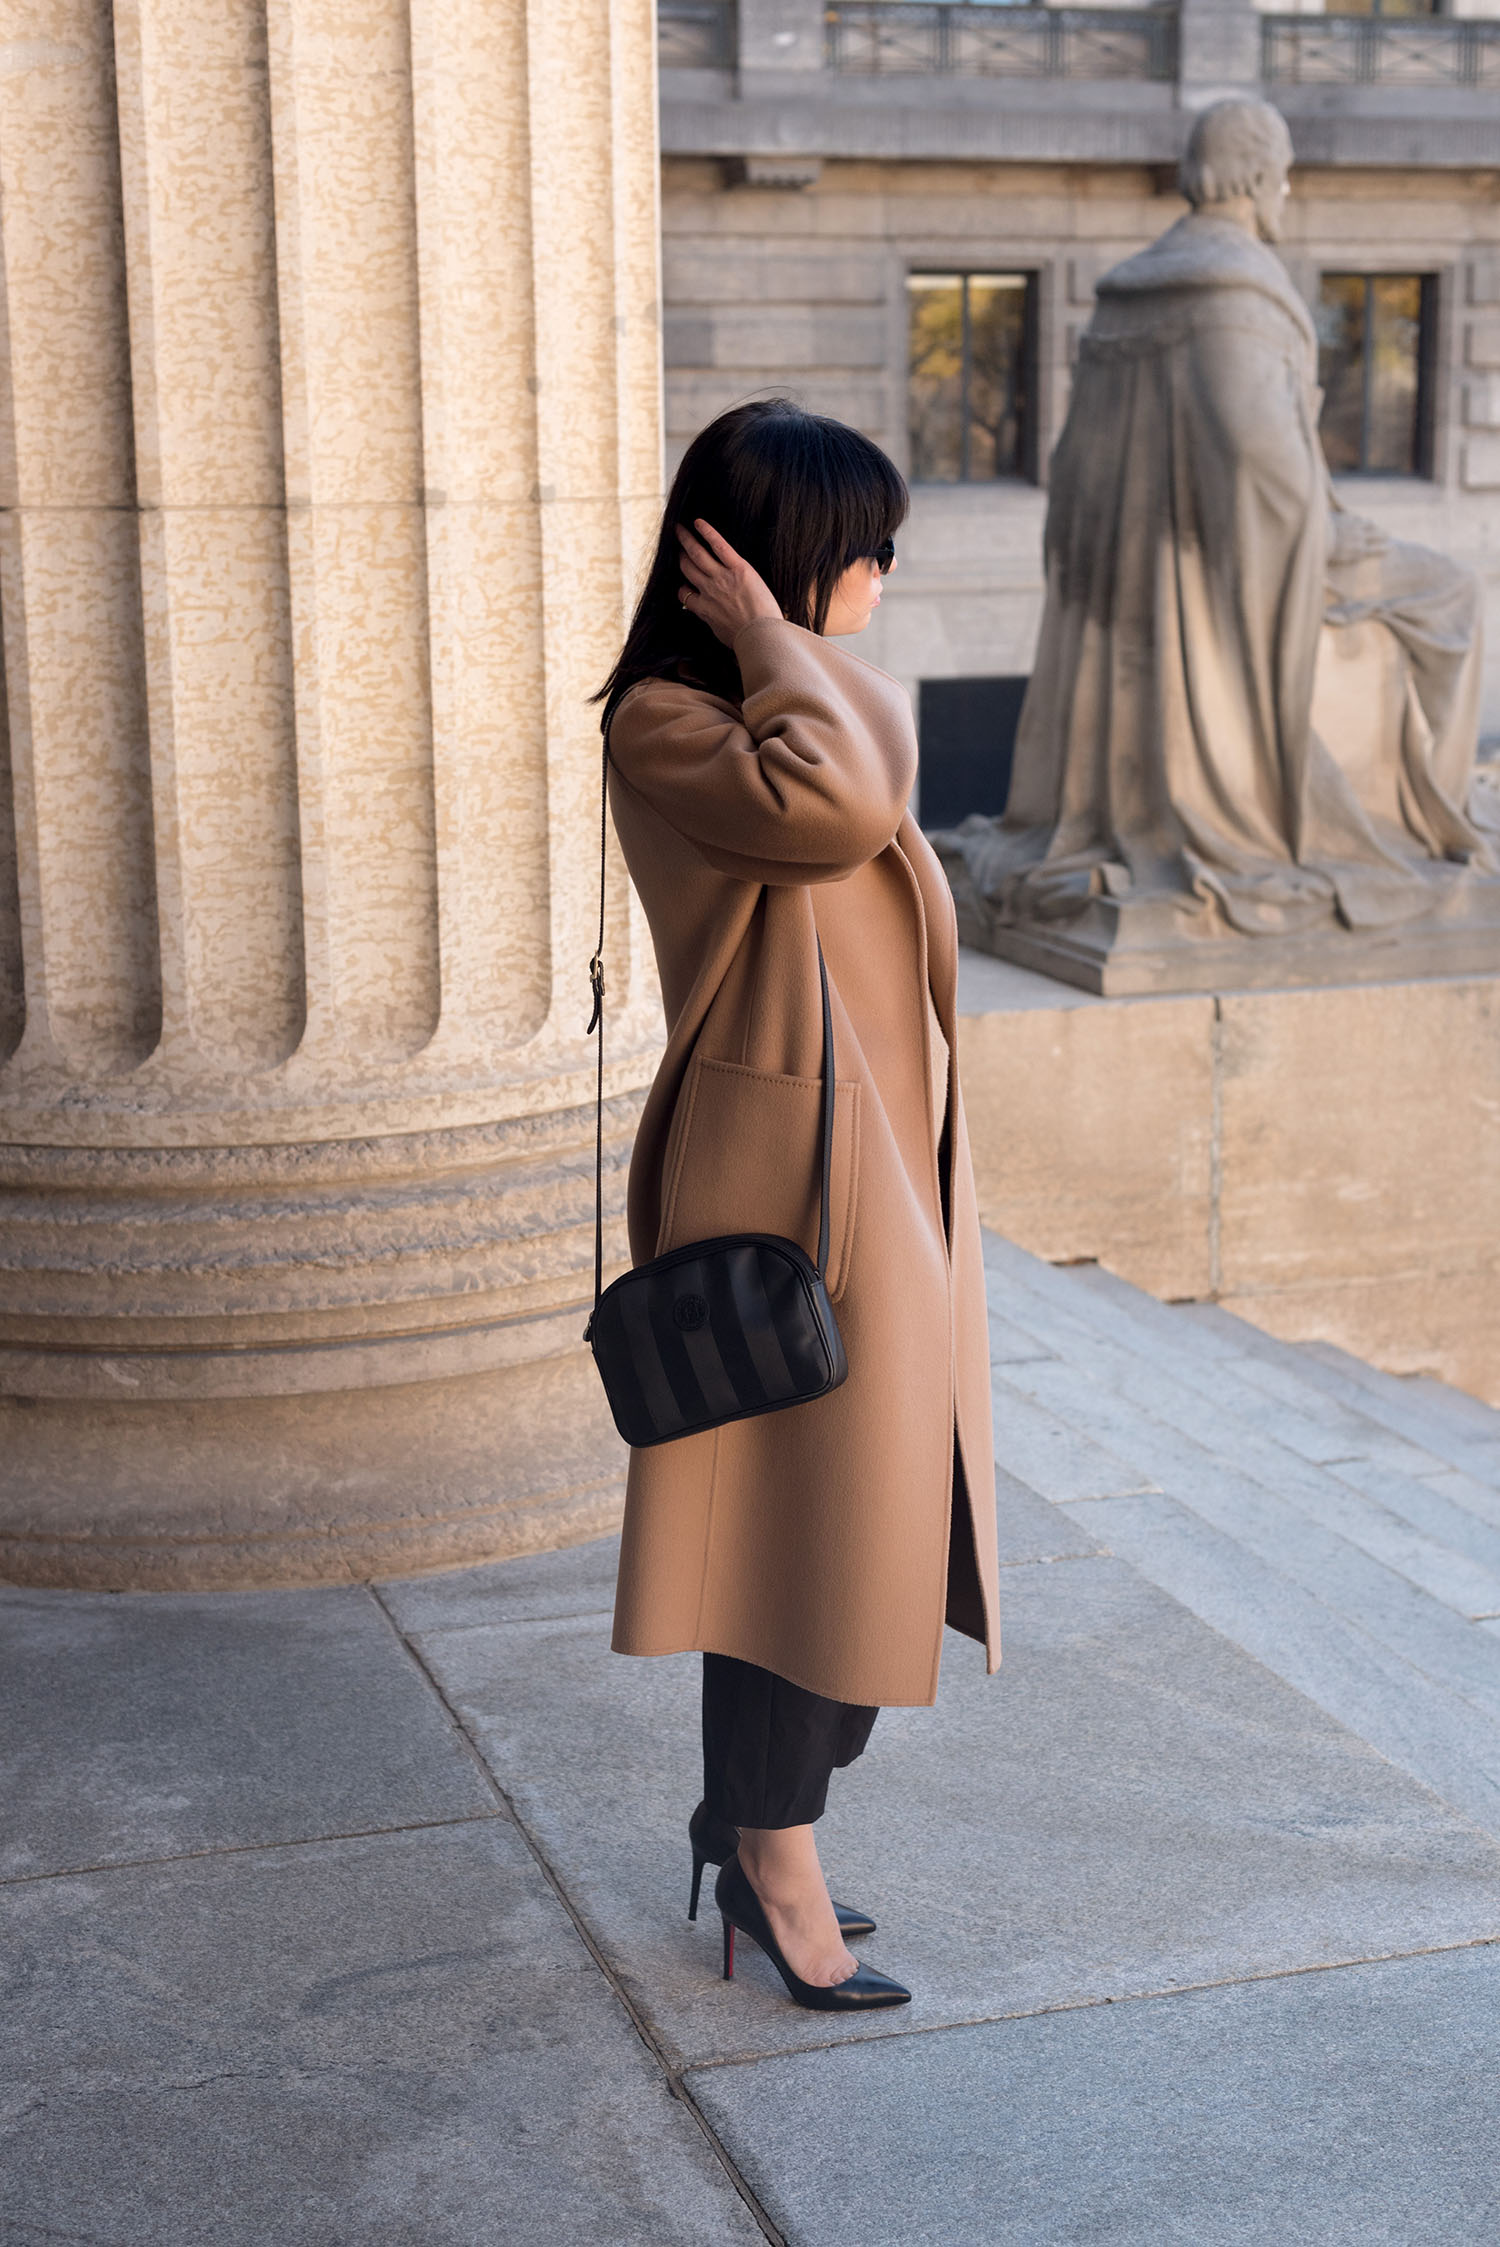 Coco & Vera - The Curated coat, Vintage Fendi bag, Christian Louboutin Pigalle pumps